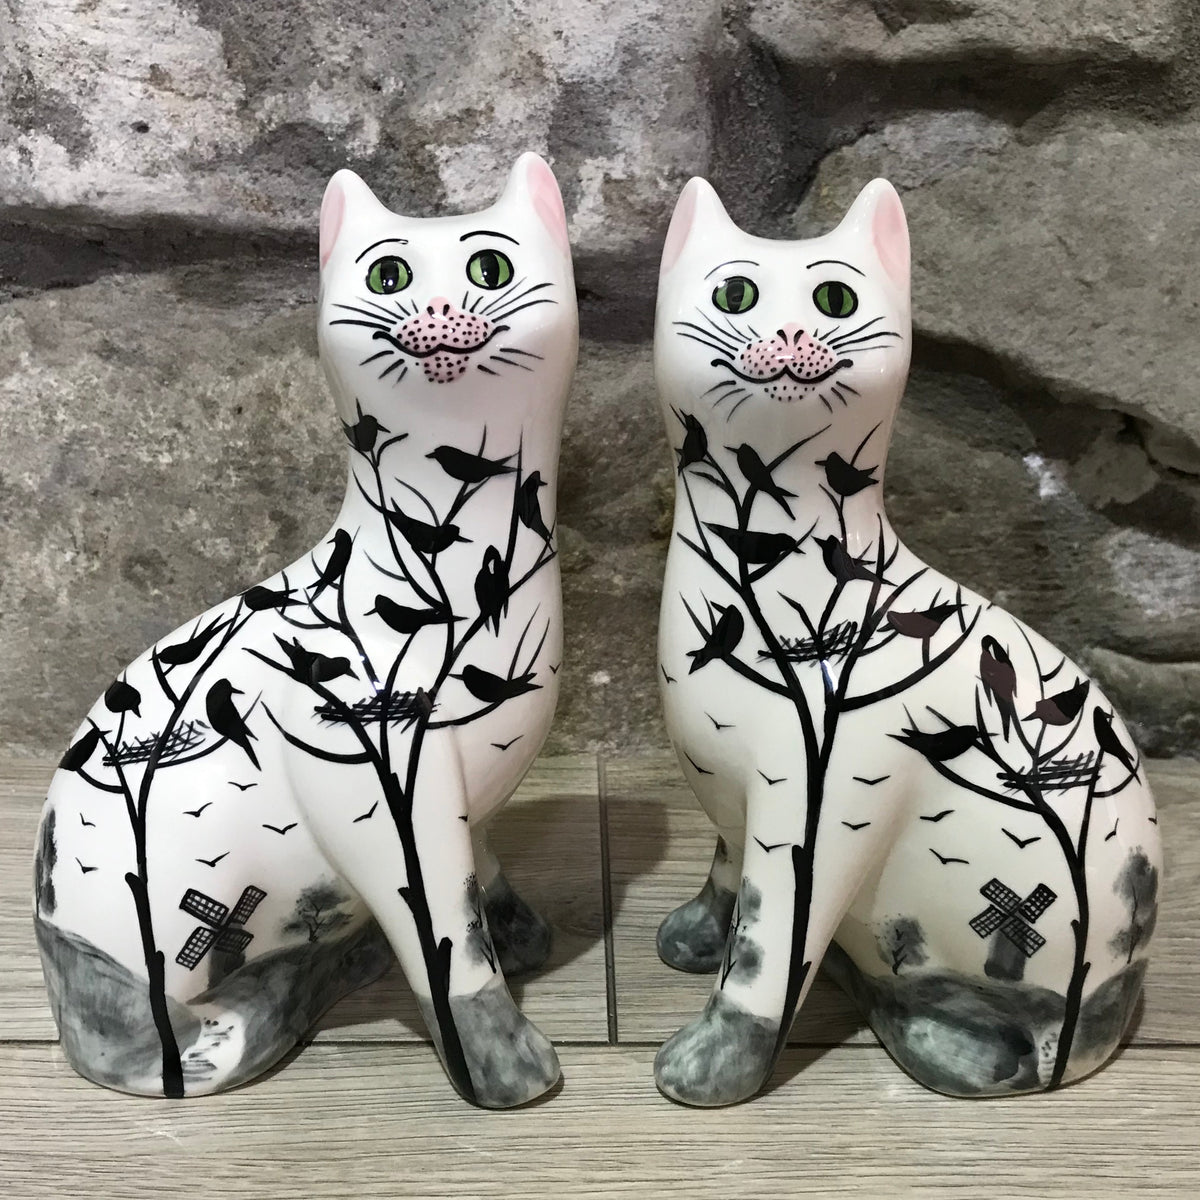 Cat Figurines Signed Old Crow Stoneware Pottery Small Sleeping Cat Figurines